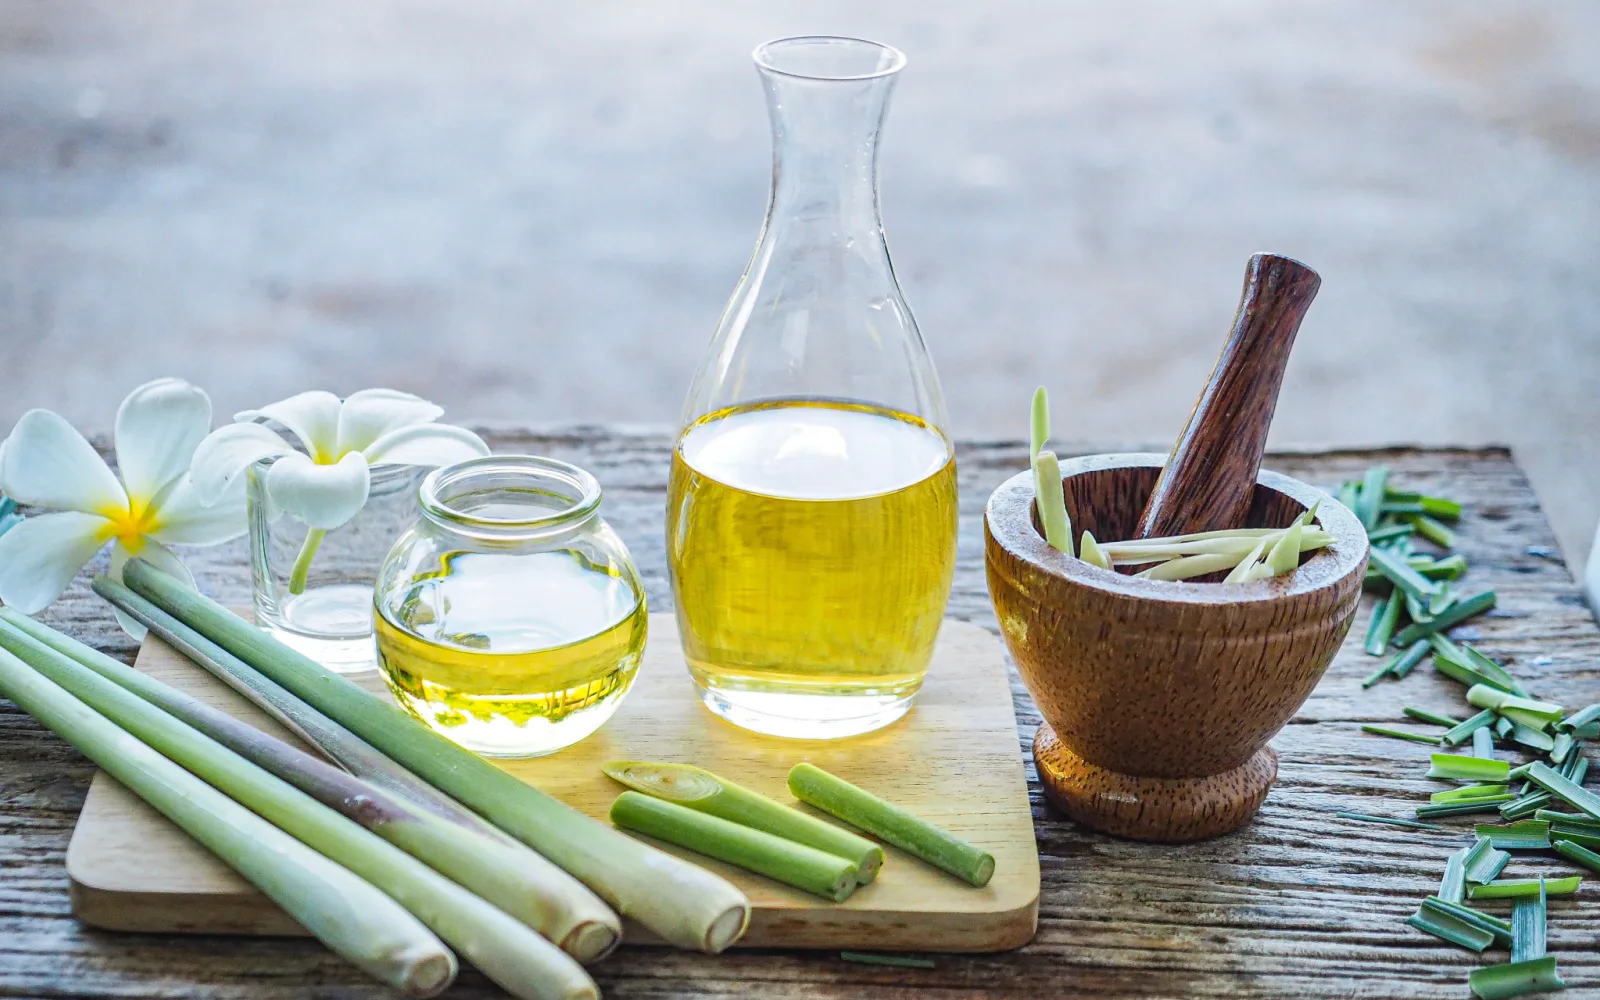 Lemongrass plant and oil next to a mortar and pestle 